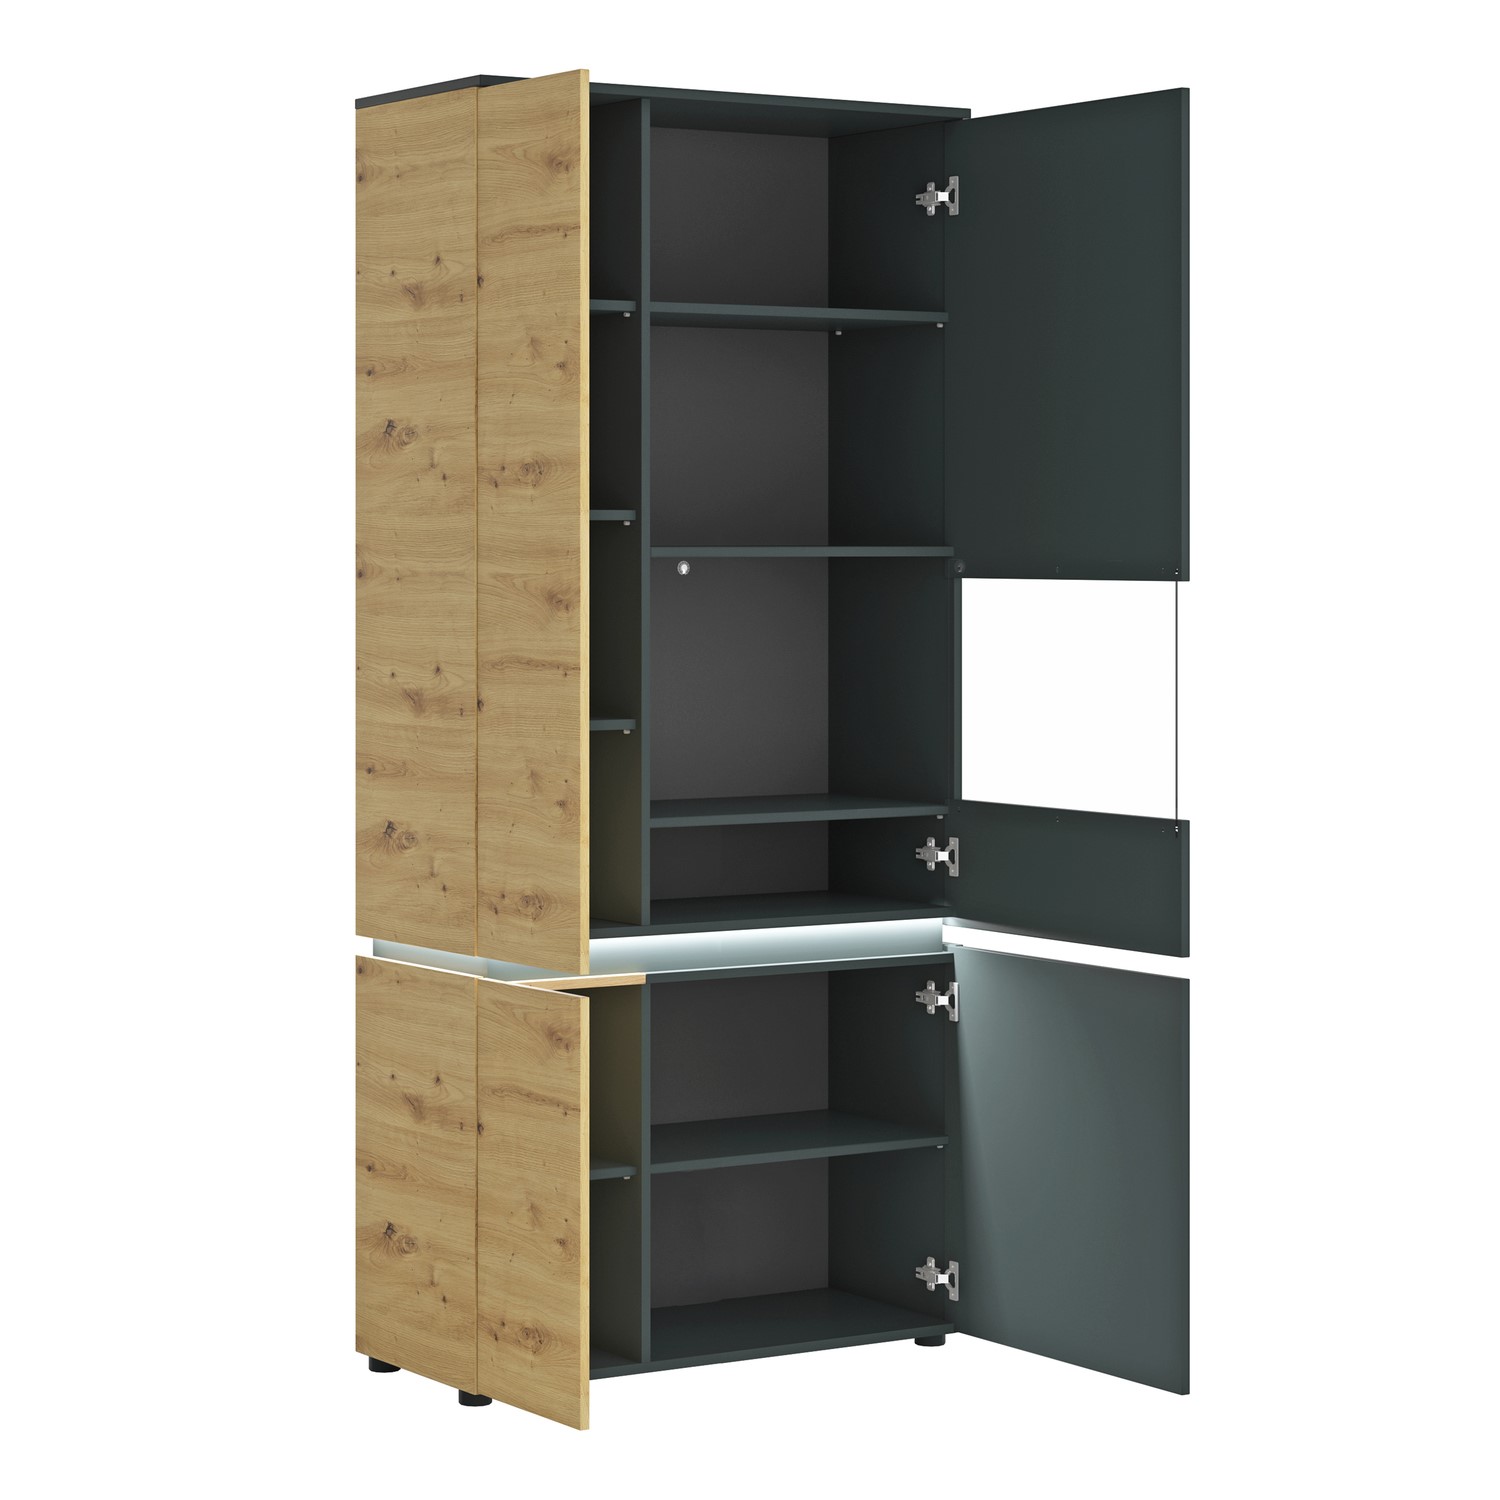 Read more about Tall dark grey and oak 4 door display cabinet with leds luci